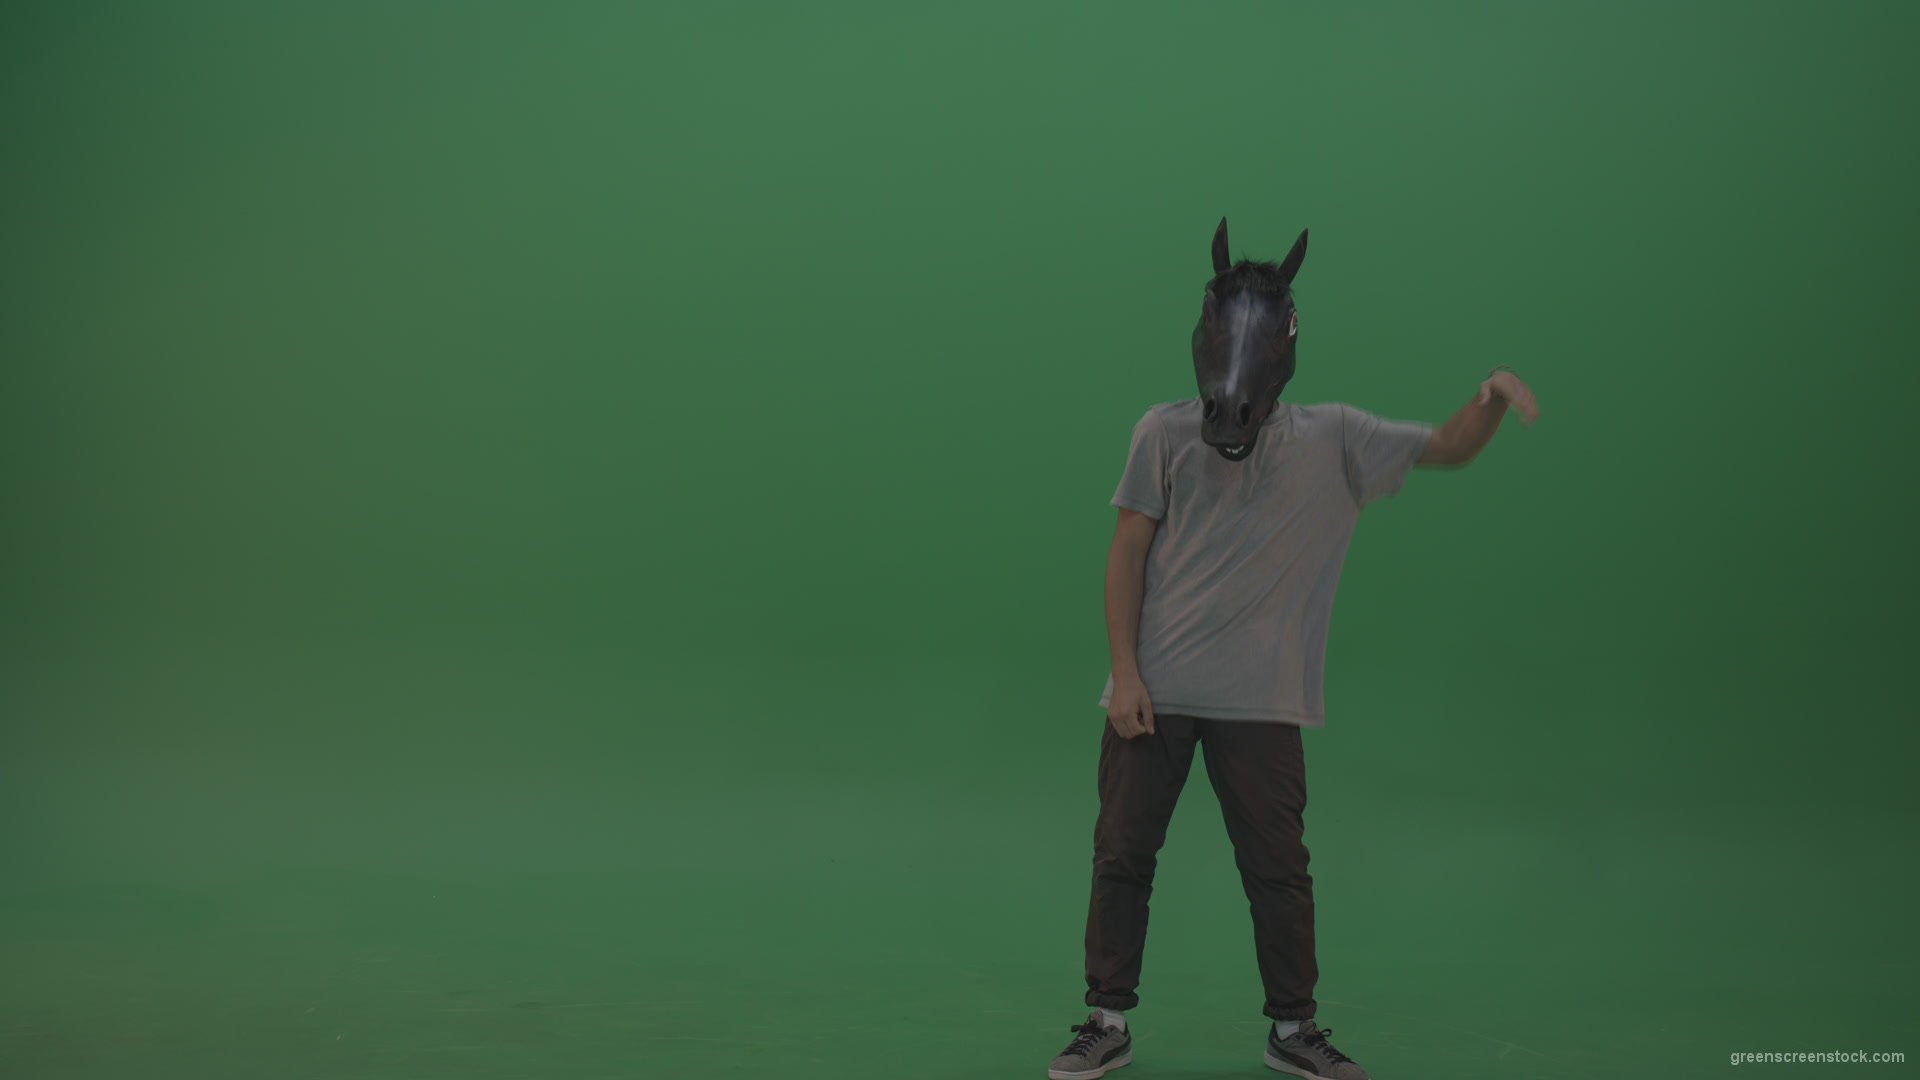 Boy-in-grey-wear-and-horse-head-costume-dances-over-green-screen-background_001 Green Screen Stock